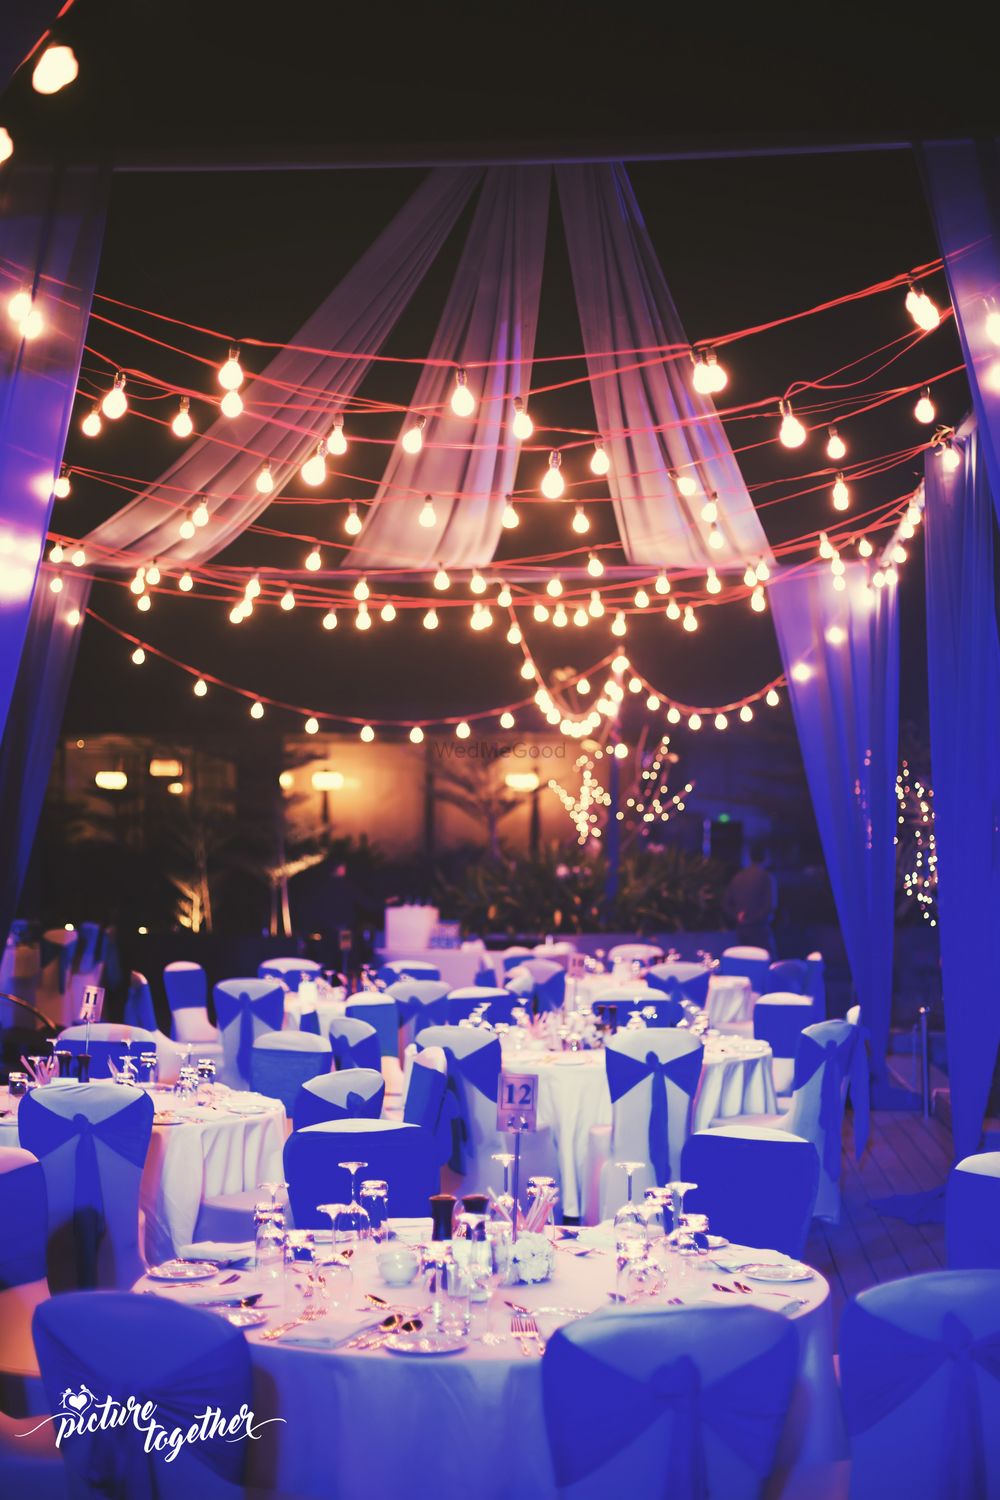 Photo of Intimate dinner setting with hanging bulbs